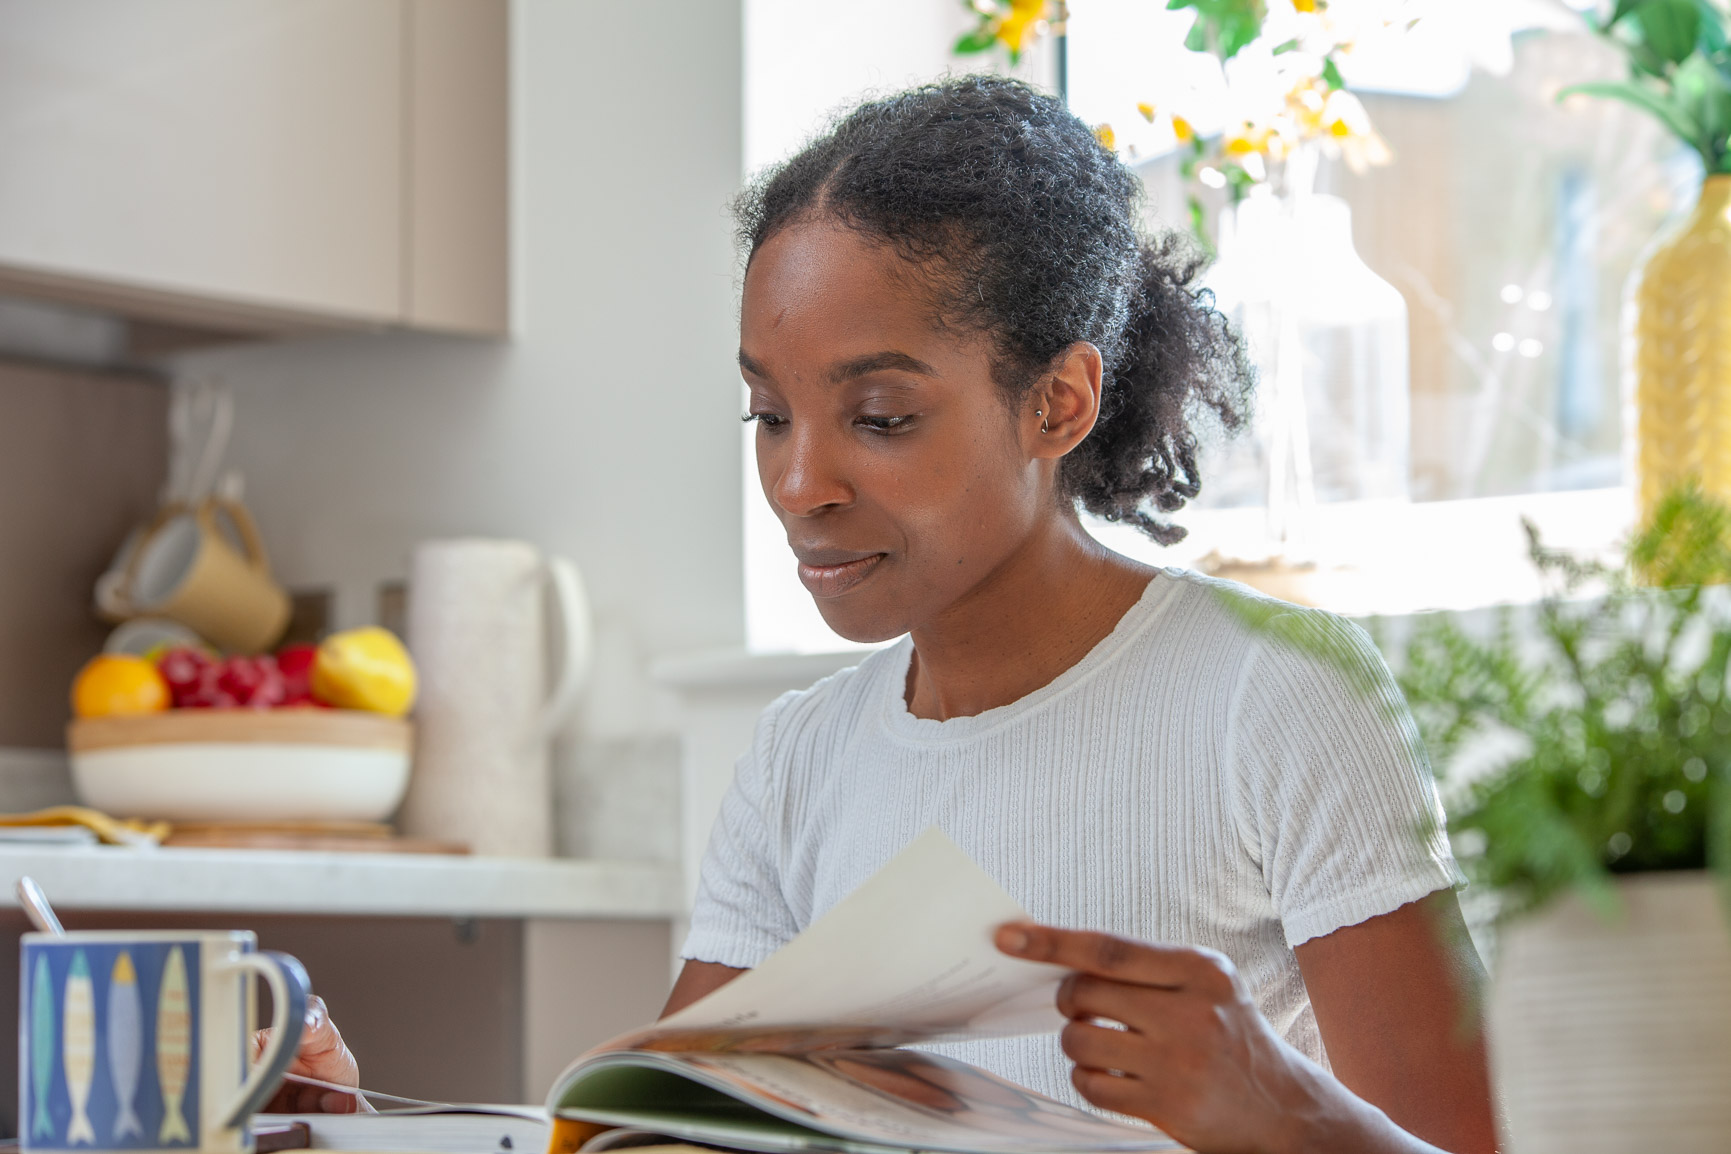 Woman in kitchen smiling and reading book